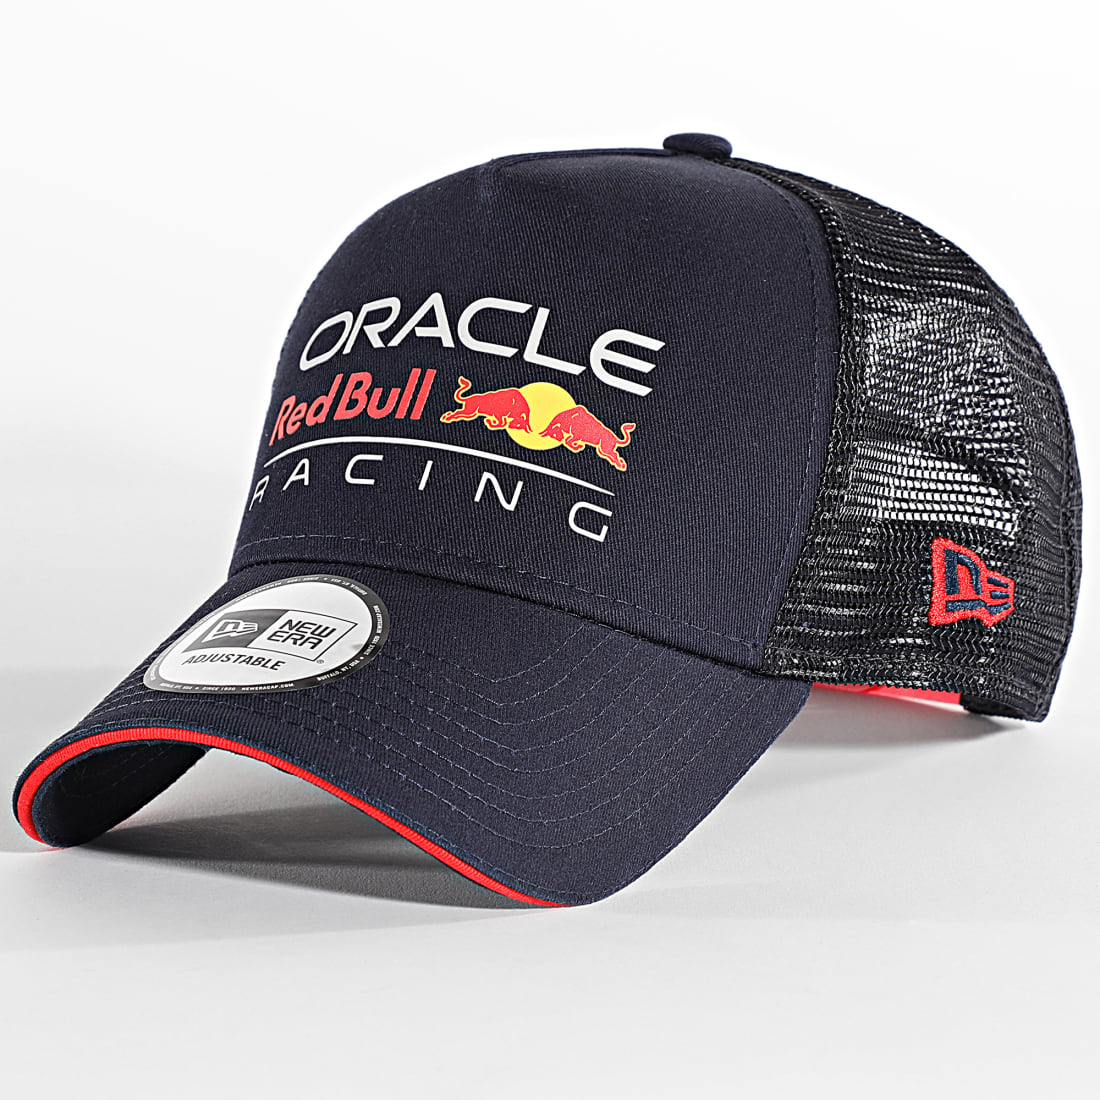 Casquette RedBull Racing 9FORTY Essential - Casquettes - Accessoires -  Equipements